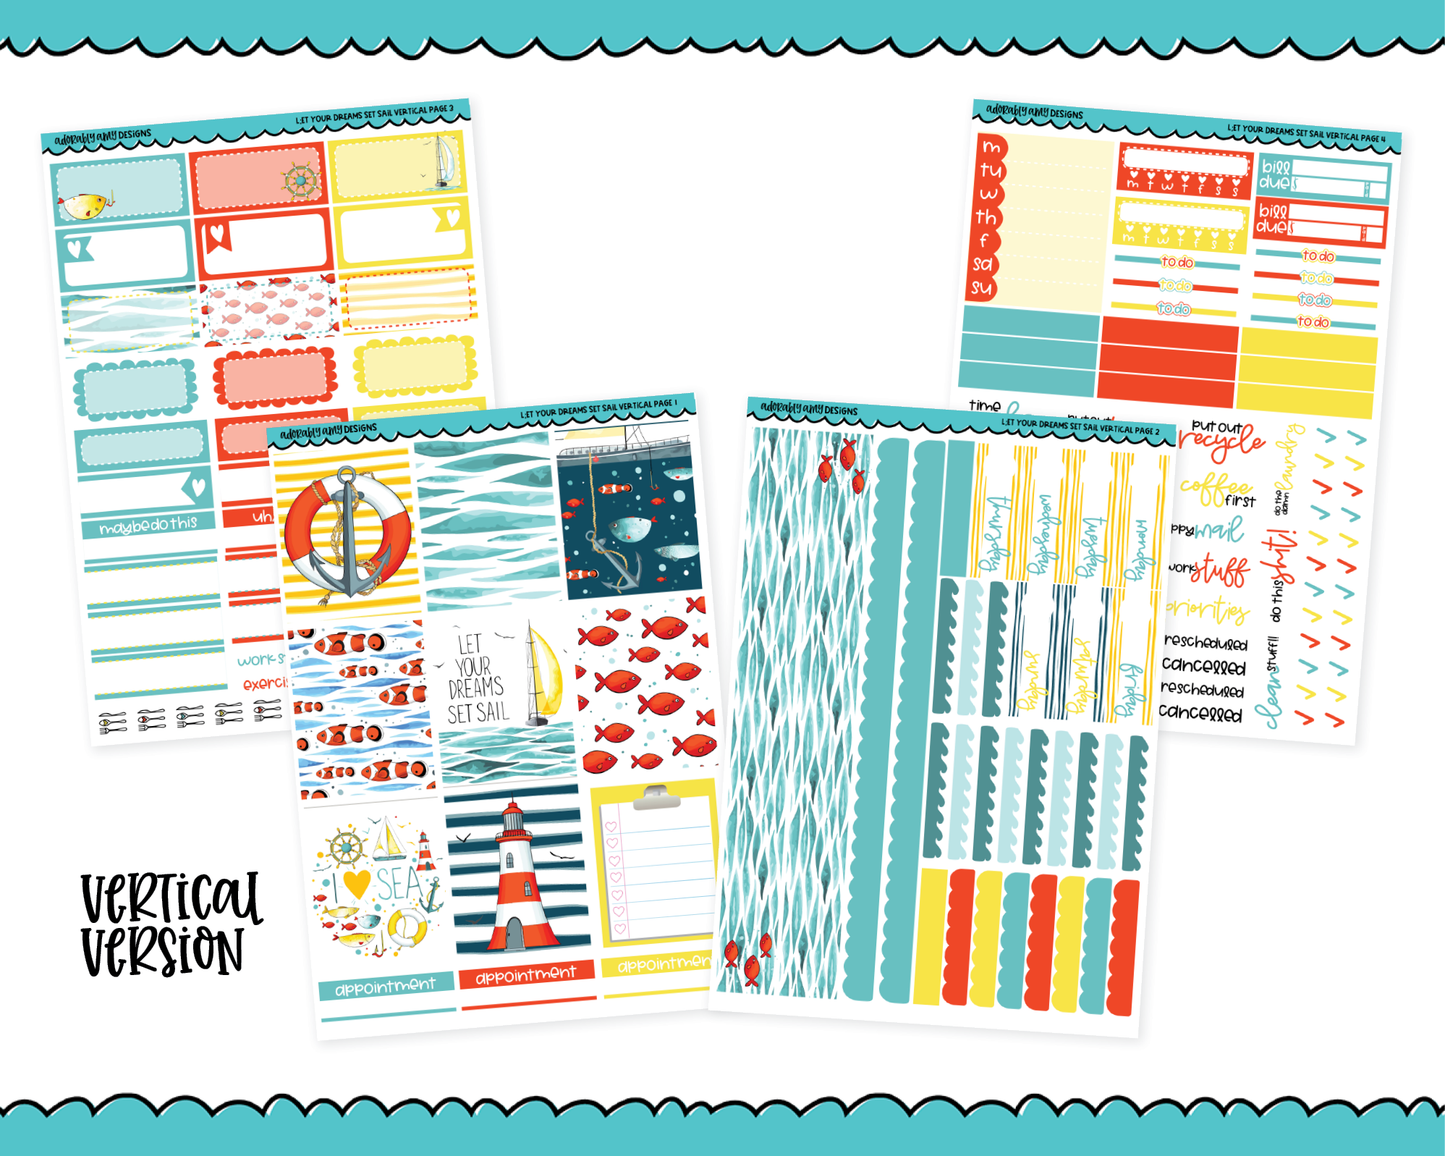 Vertical Let Your Dreams Set Sail Planner Sticker Kit for Vertical Standard Size Planners or Inserts